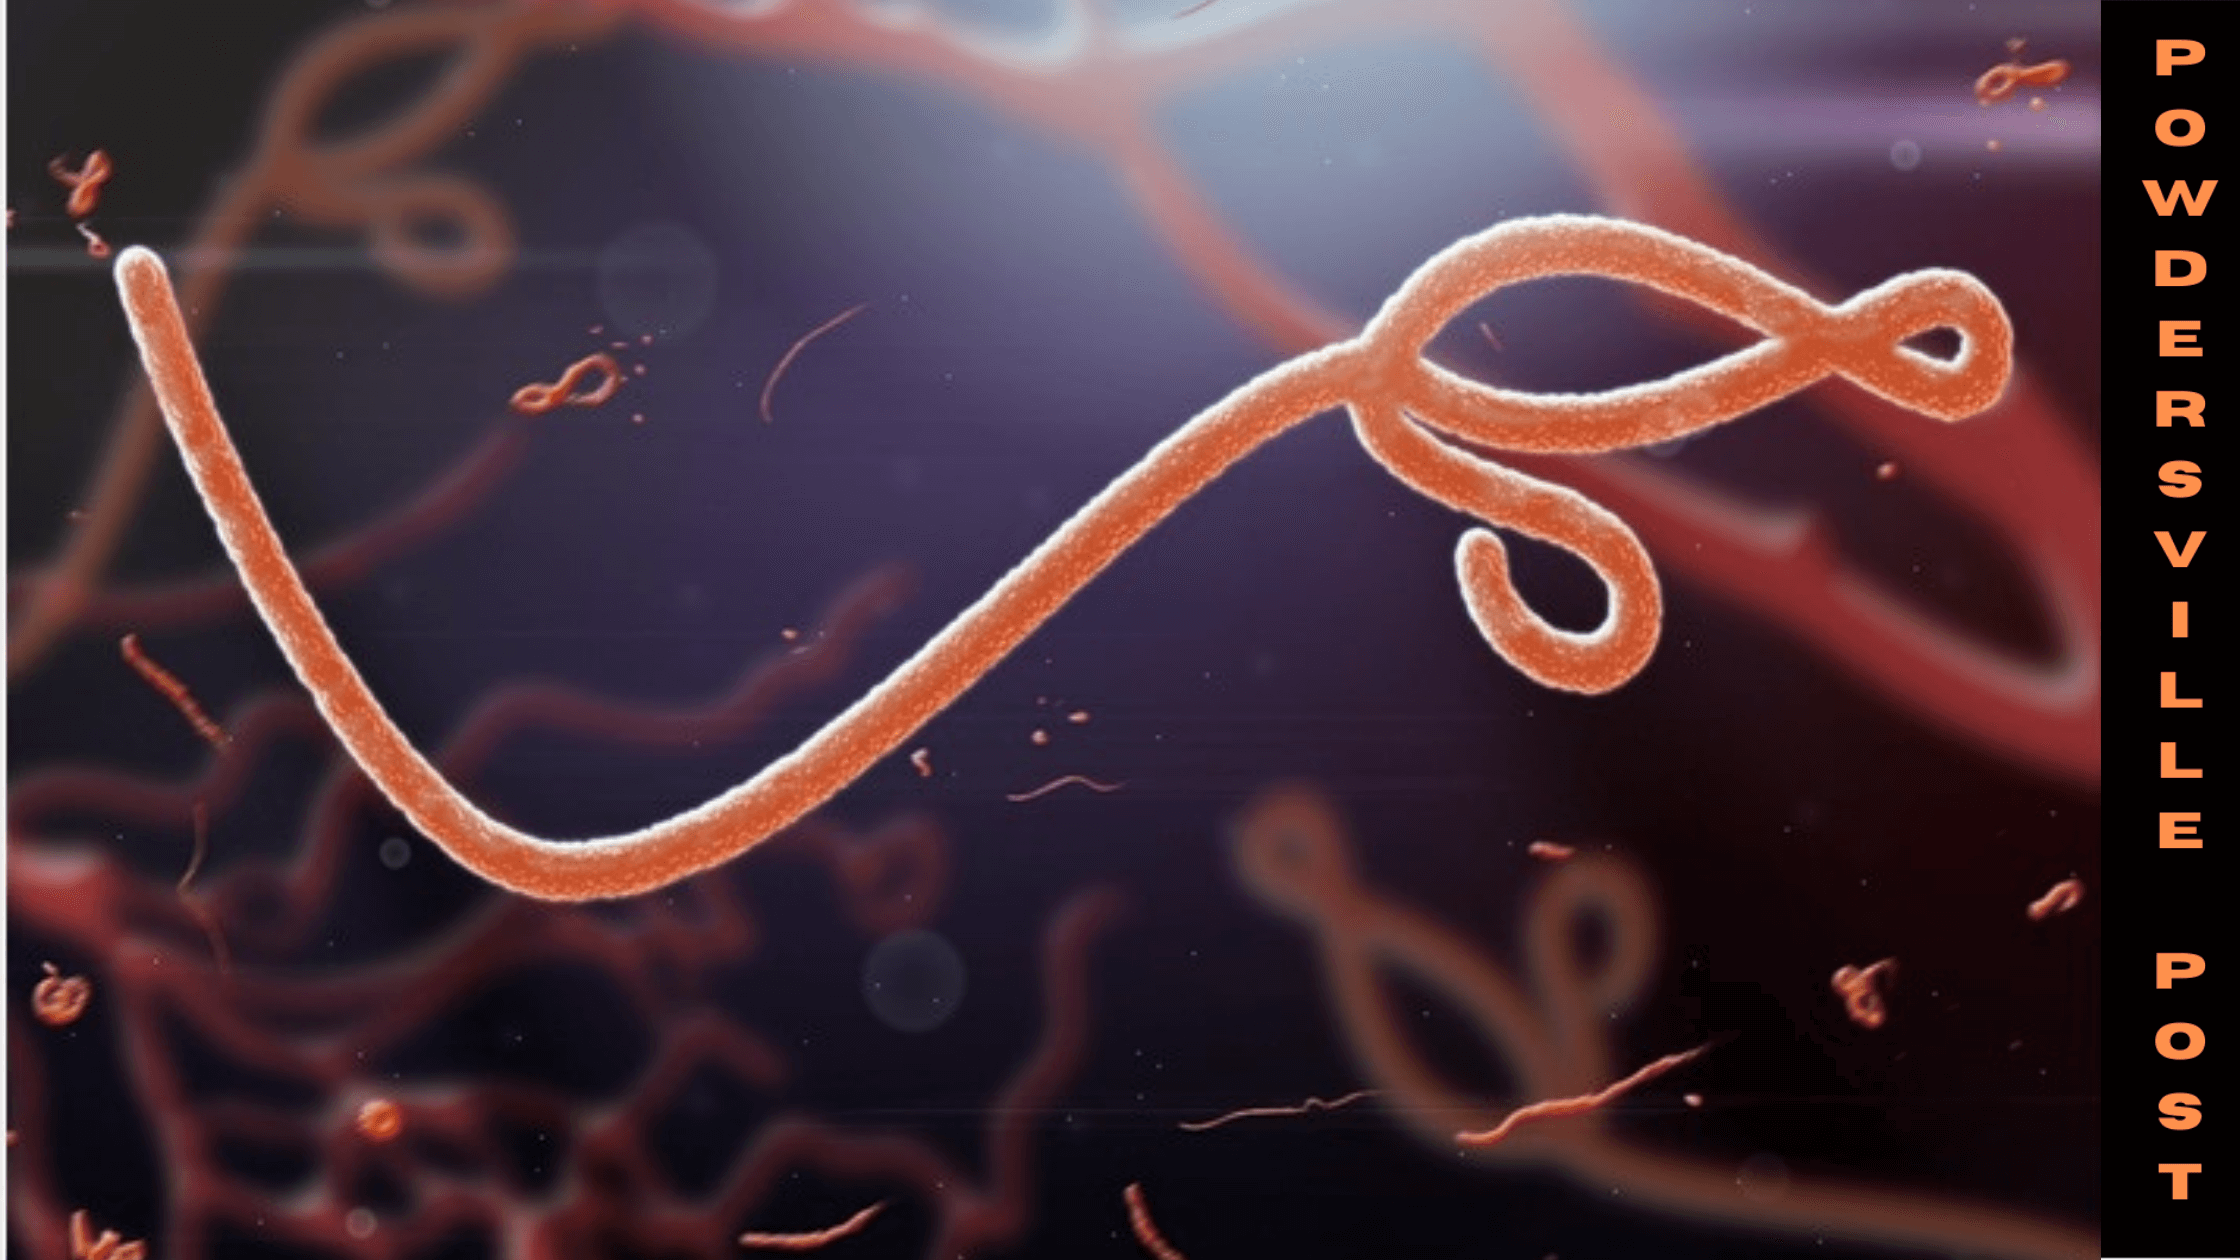 The Ebola Vaccine Offers Long-Term Protection Study Founds